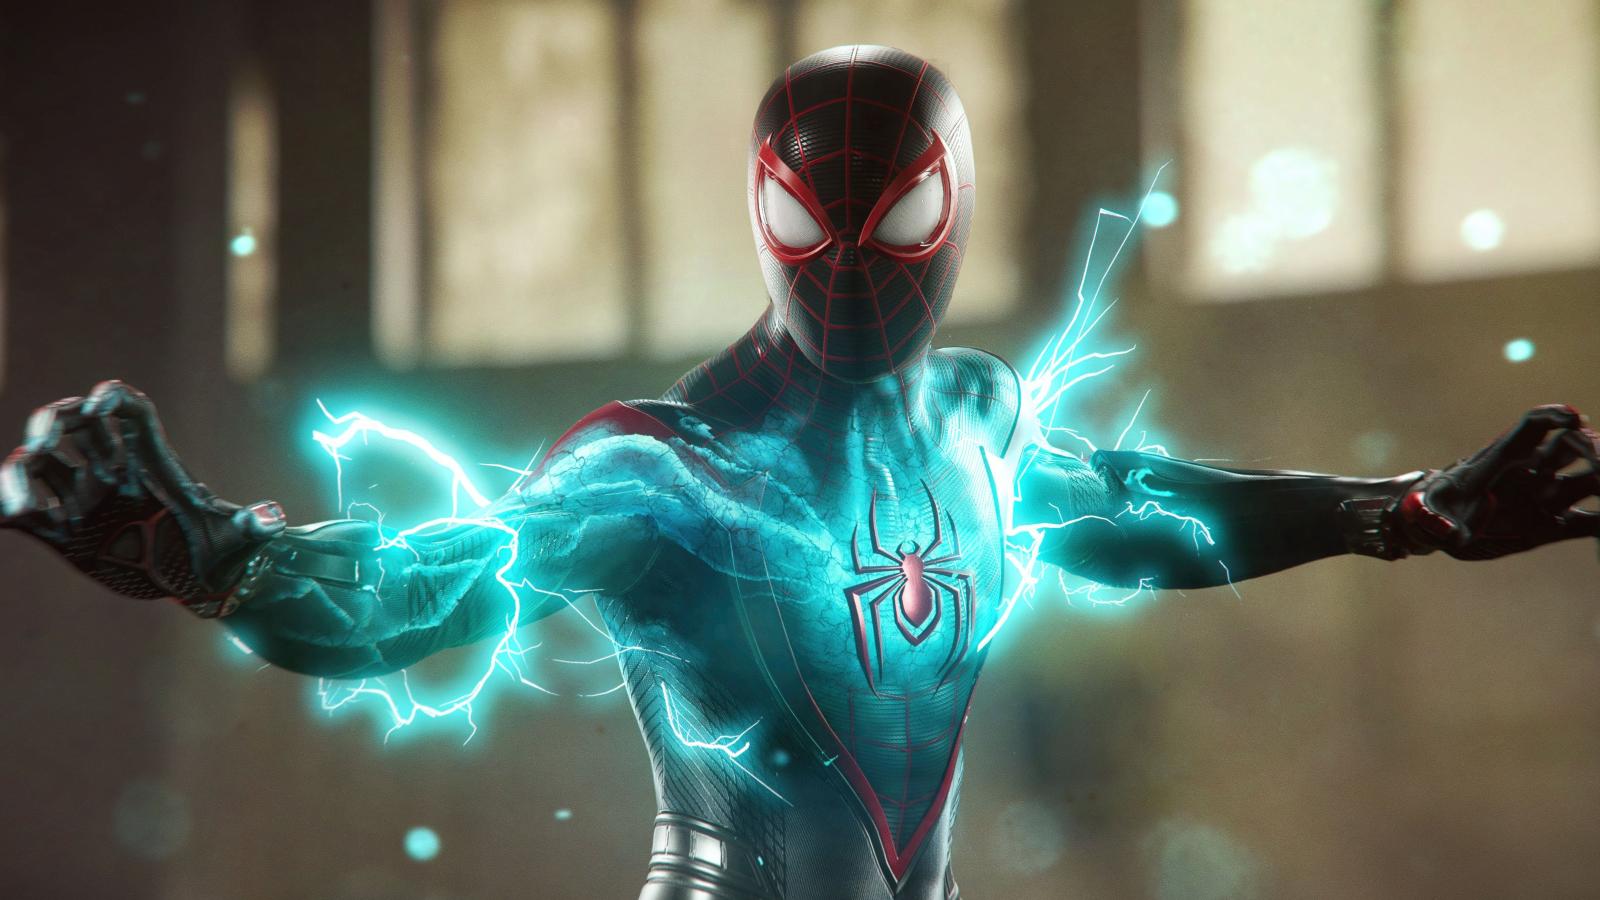 Check out today's new Spider-Man 2 story recap trailer, plus full rundown  of the game's Photo Mode